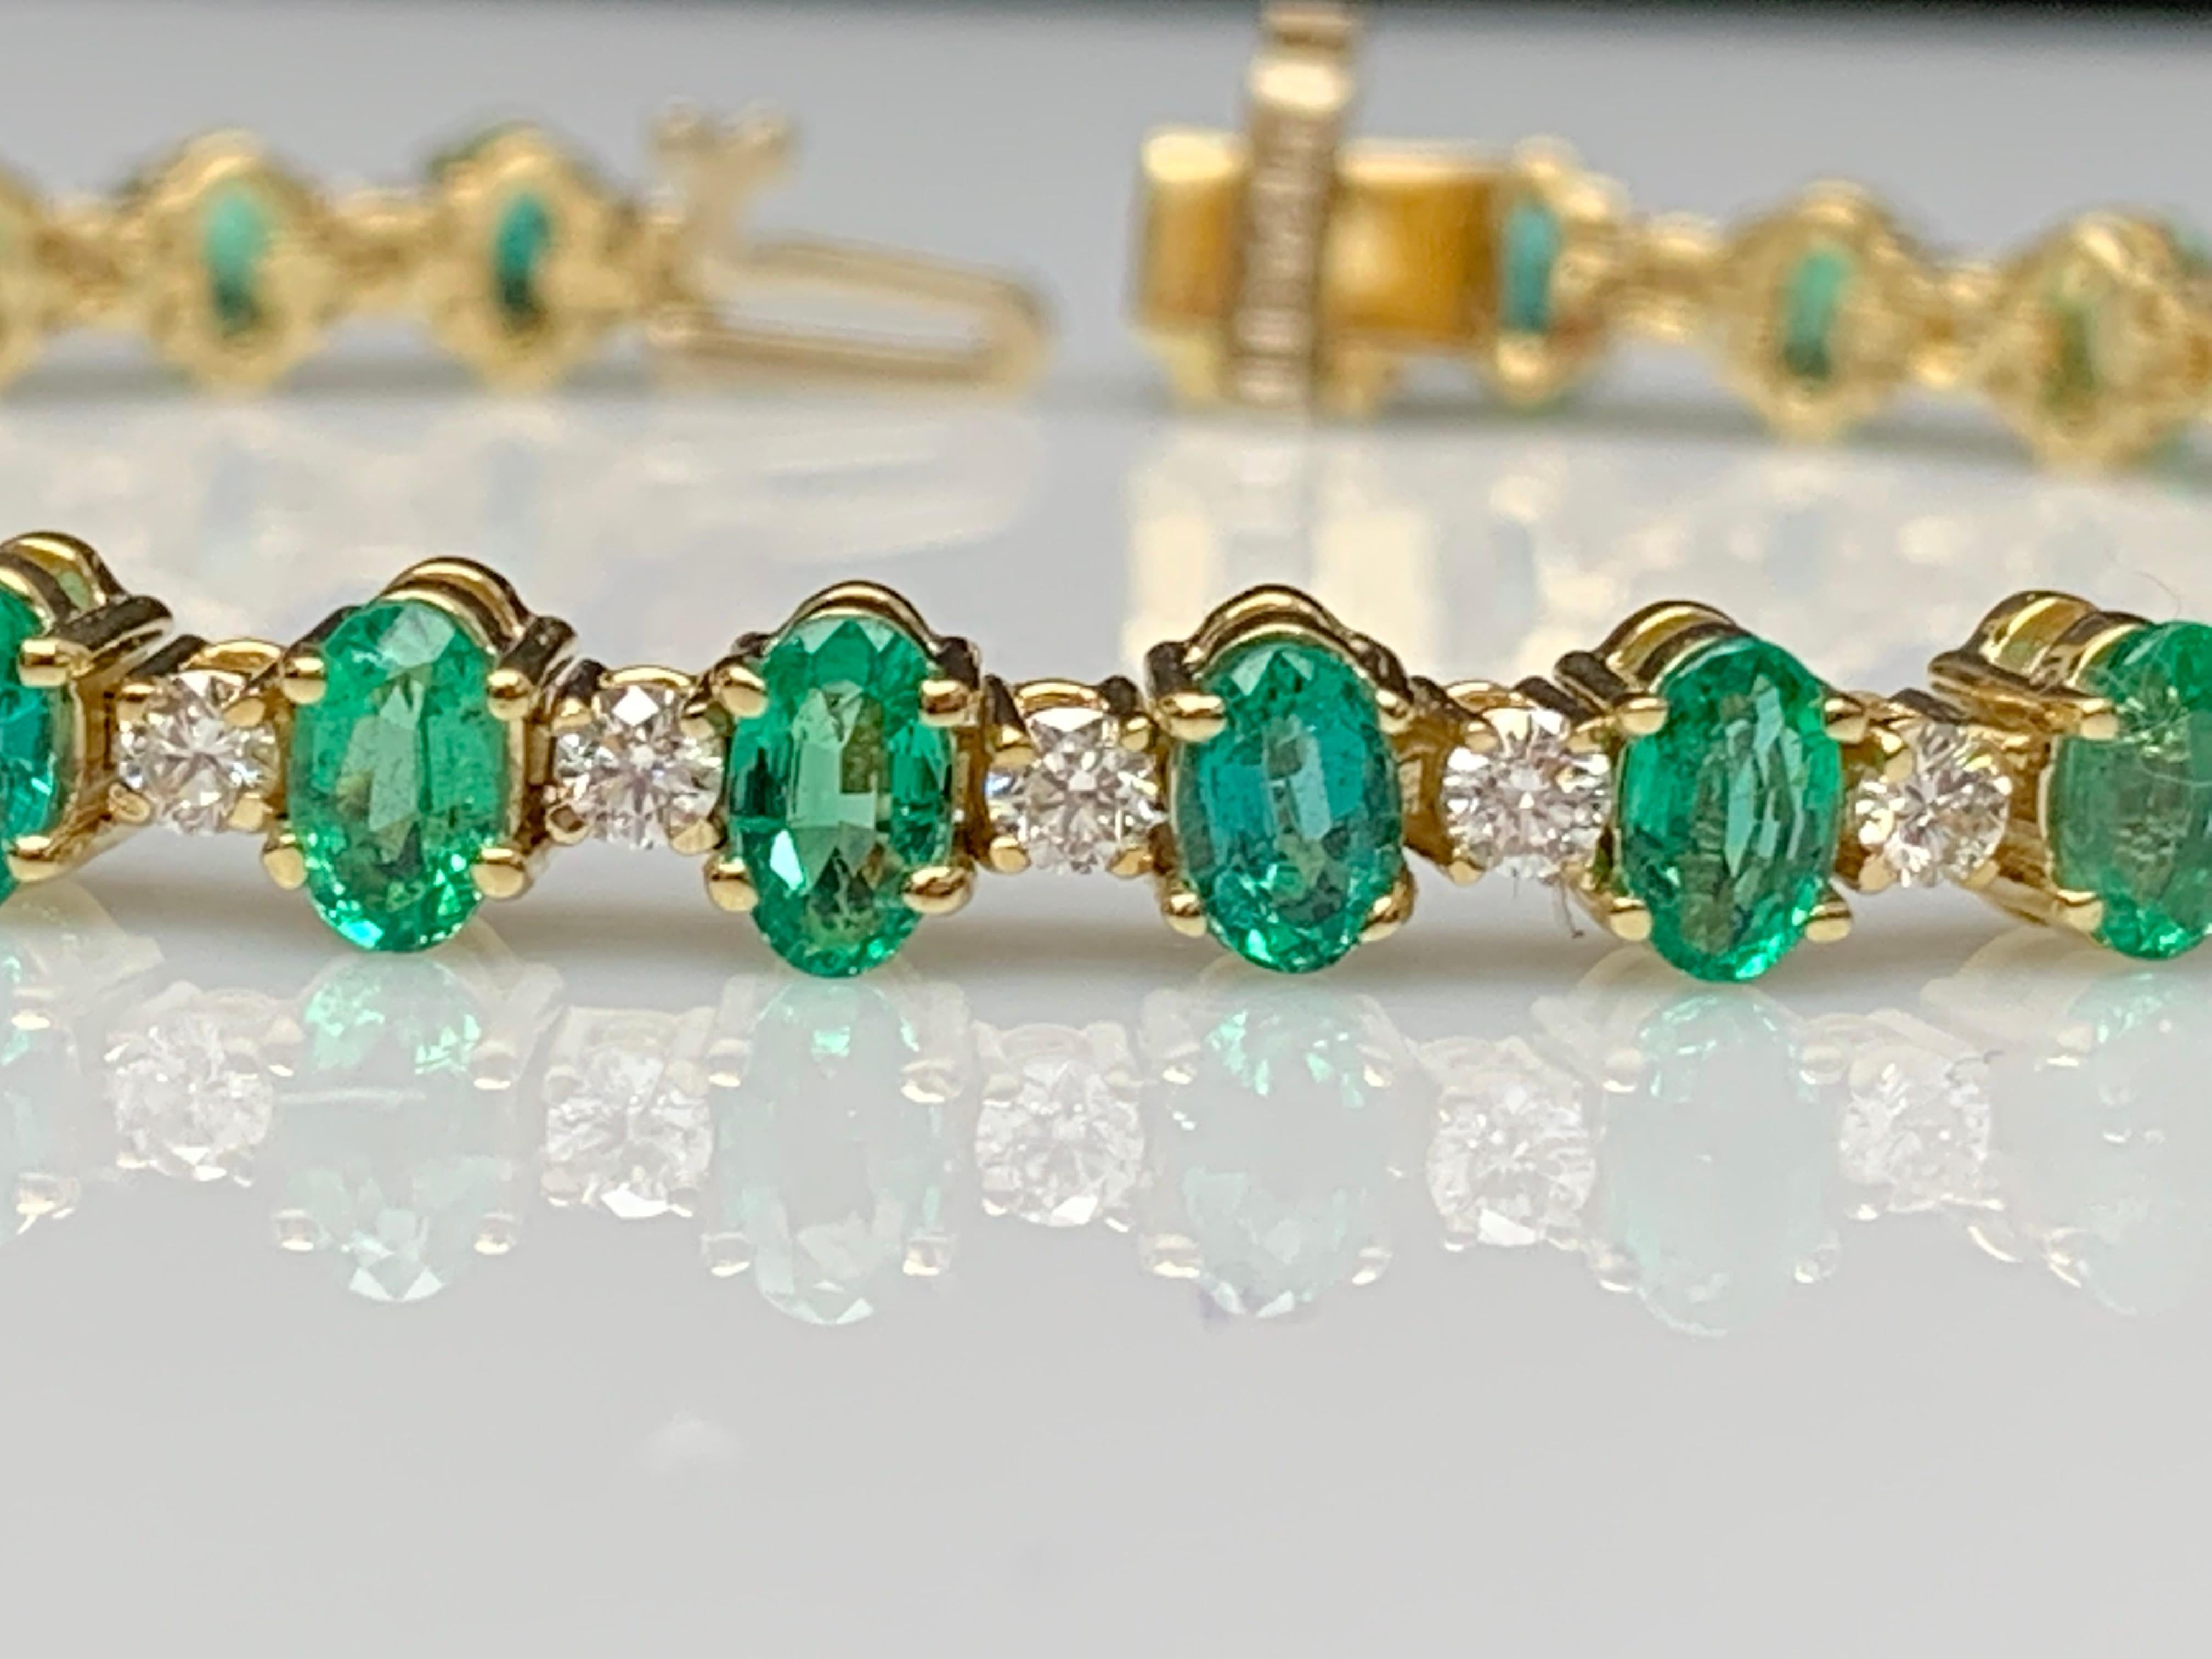 Grandeur 6.30 Carats Oval Cut Emeralds and Diamond Bracelet in 14k Yellow Gold For Sale 5